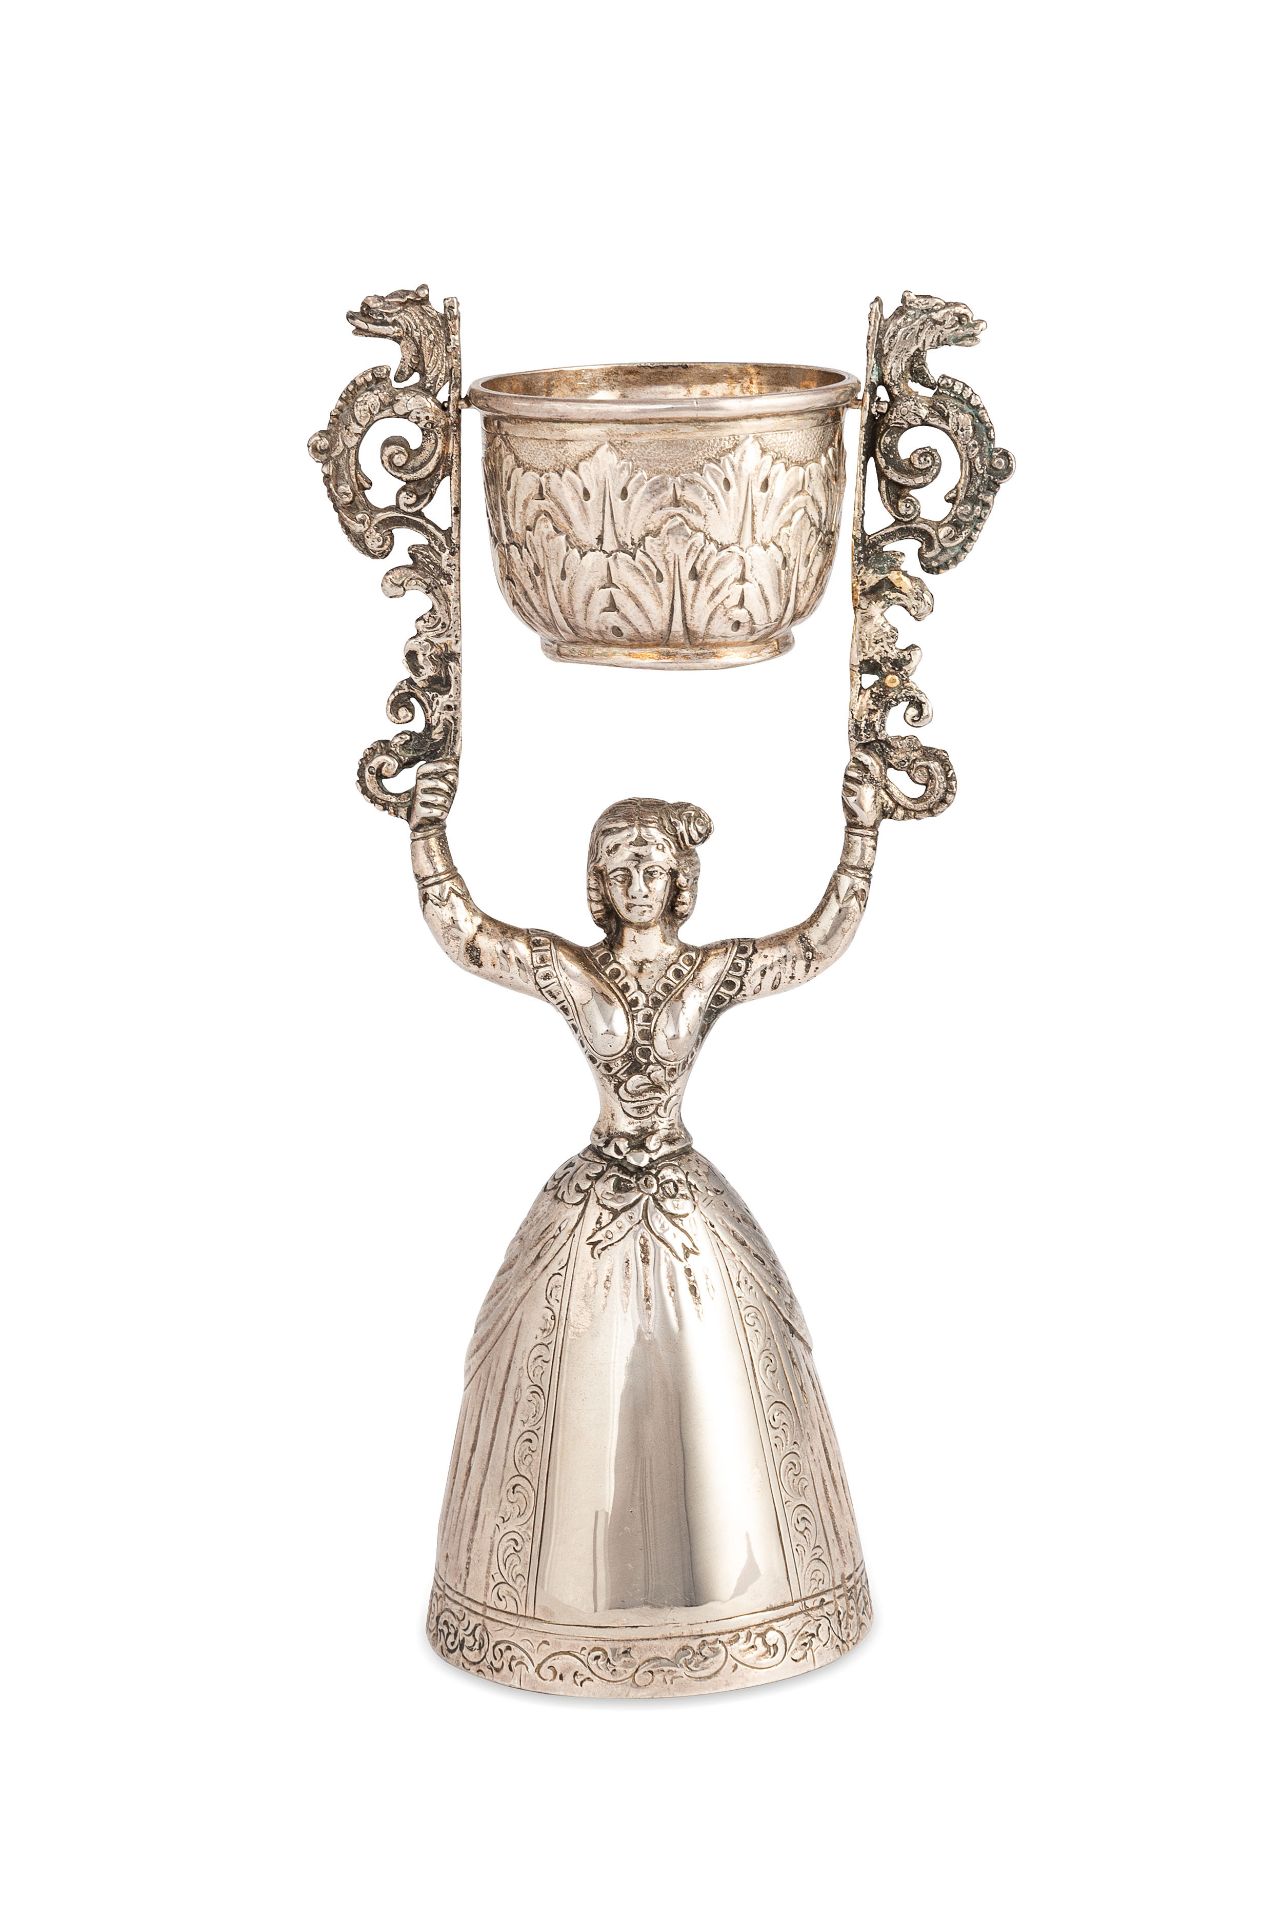 WAGER CUP IN ARGENTO, LONDRA, 1831